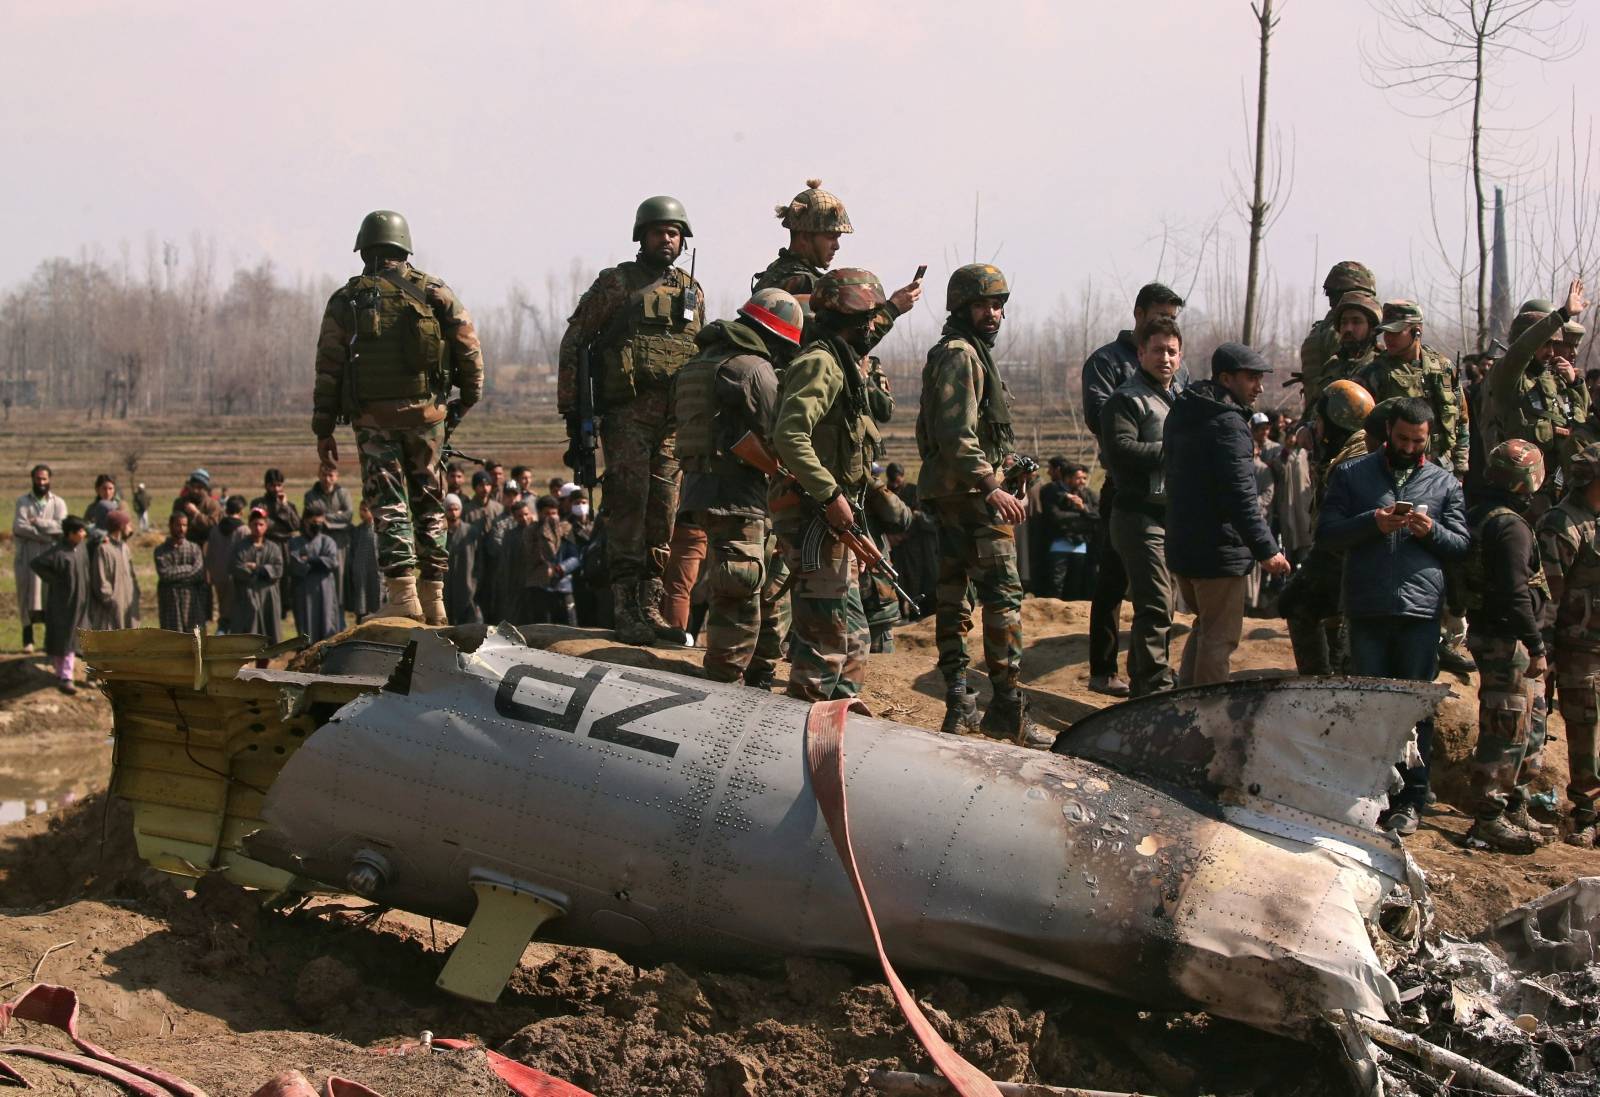 Indian soldiers stand next to the wreckage of IAF helicopter after it crashed in Budgam district